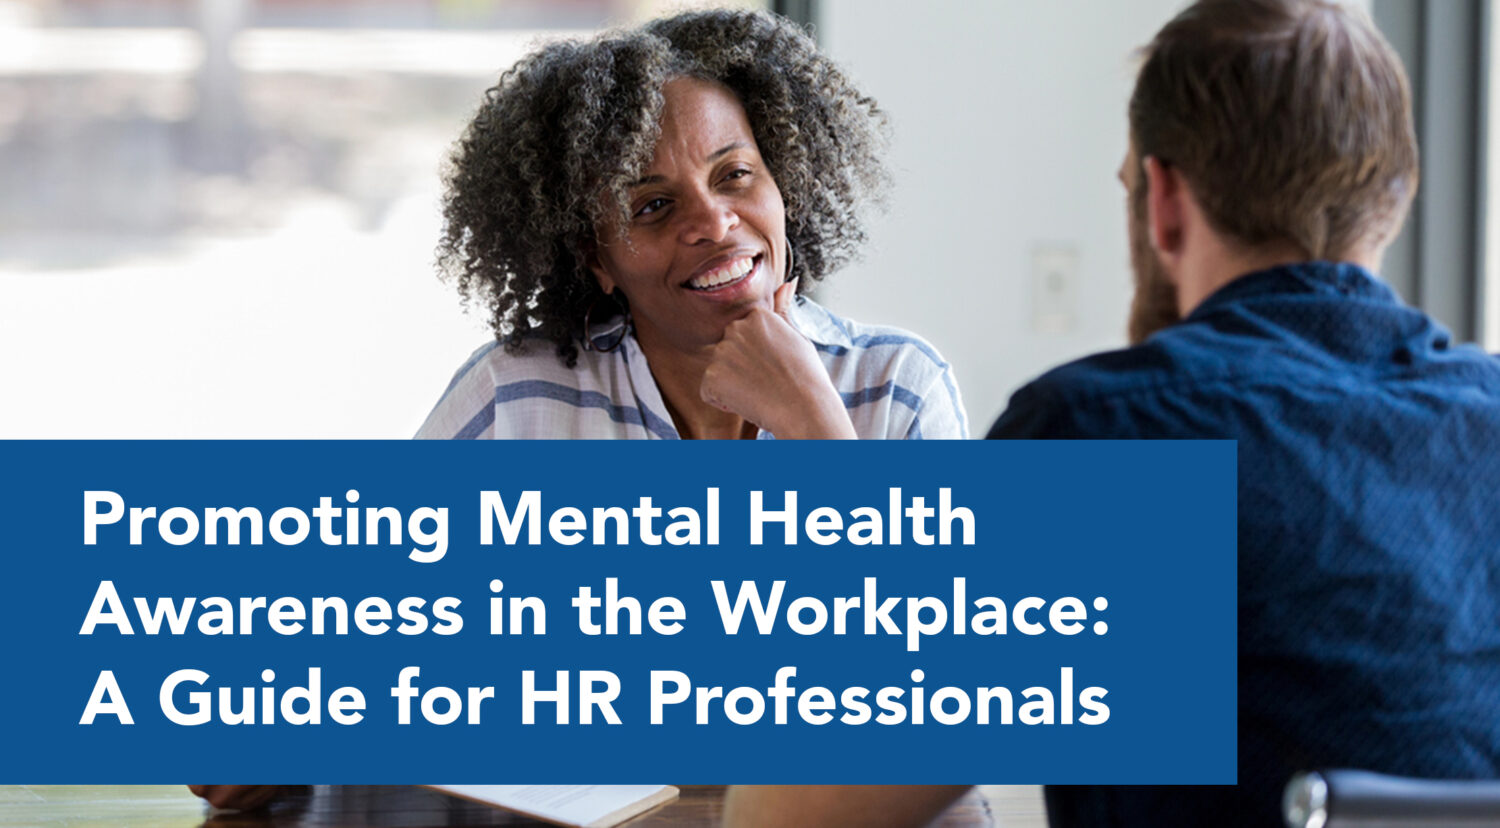 Promoting Mental Health Awareness in the Workplace: A Guide for HR Professionals